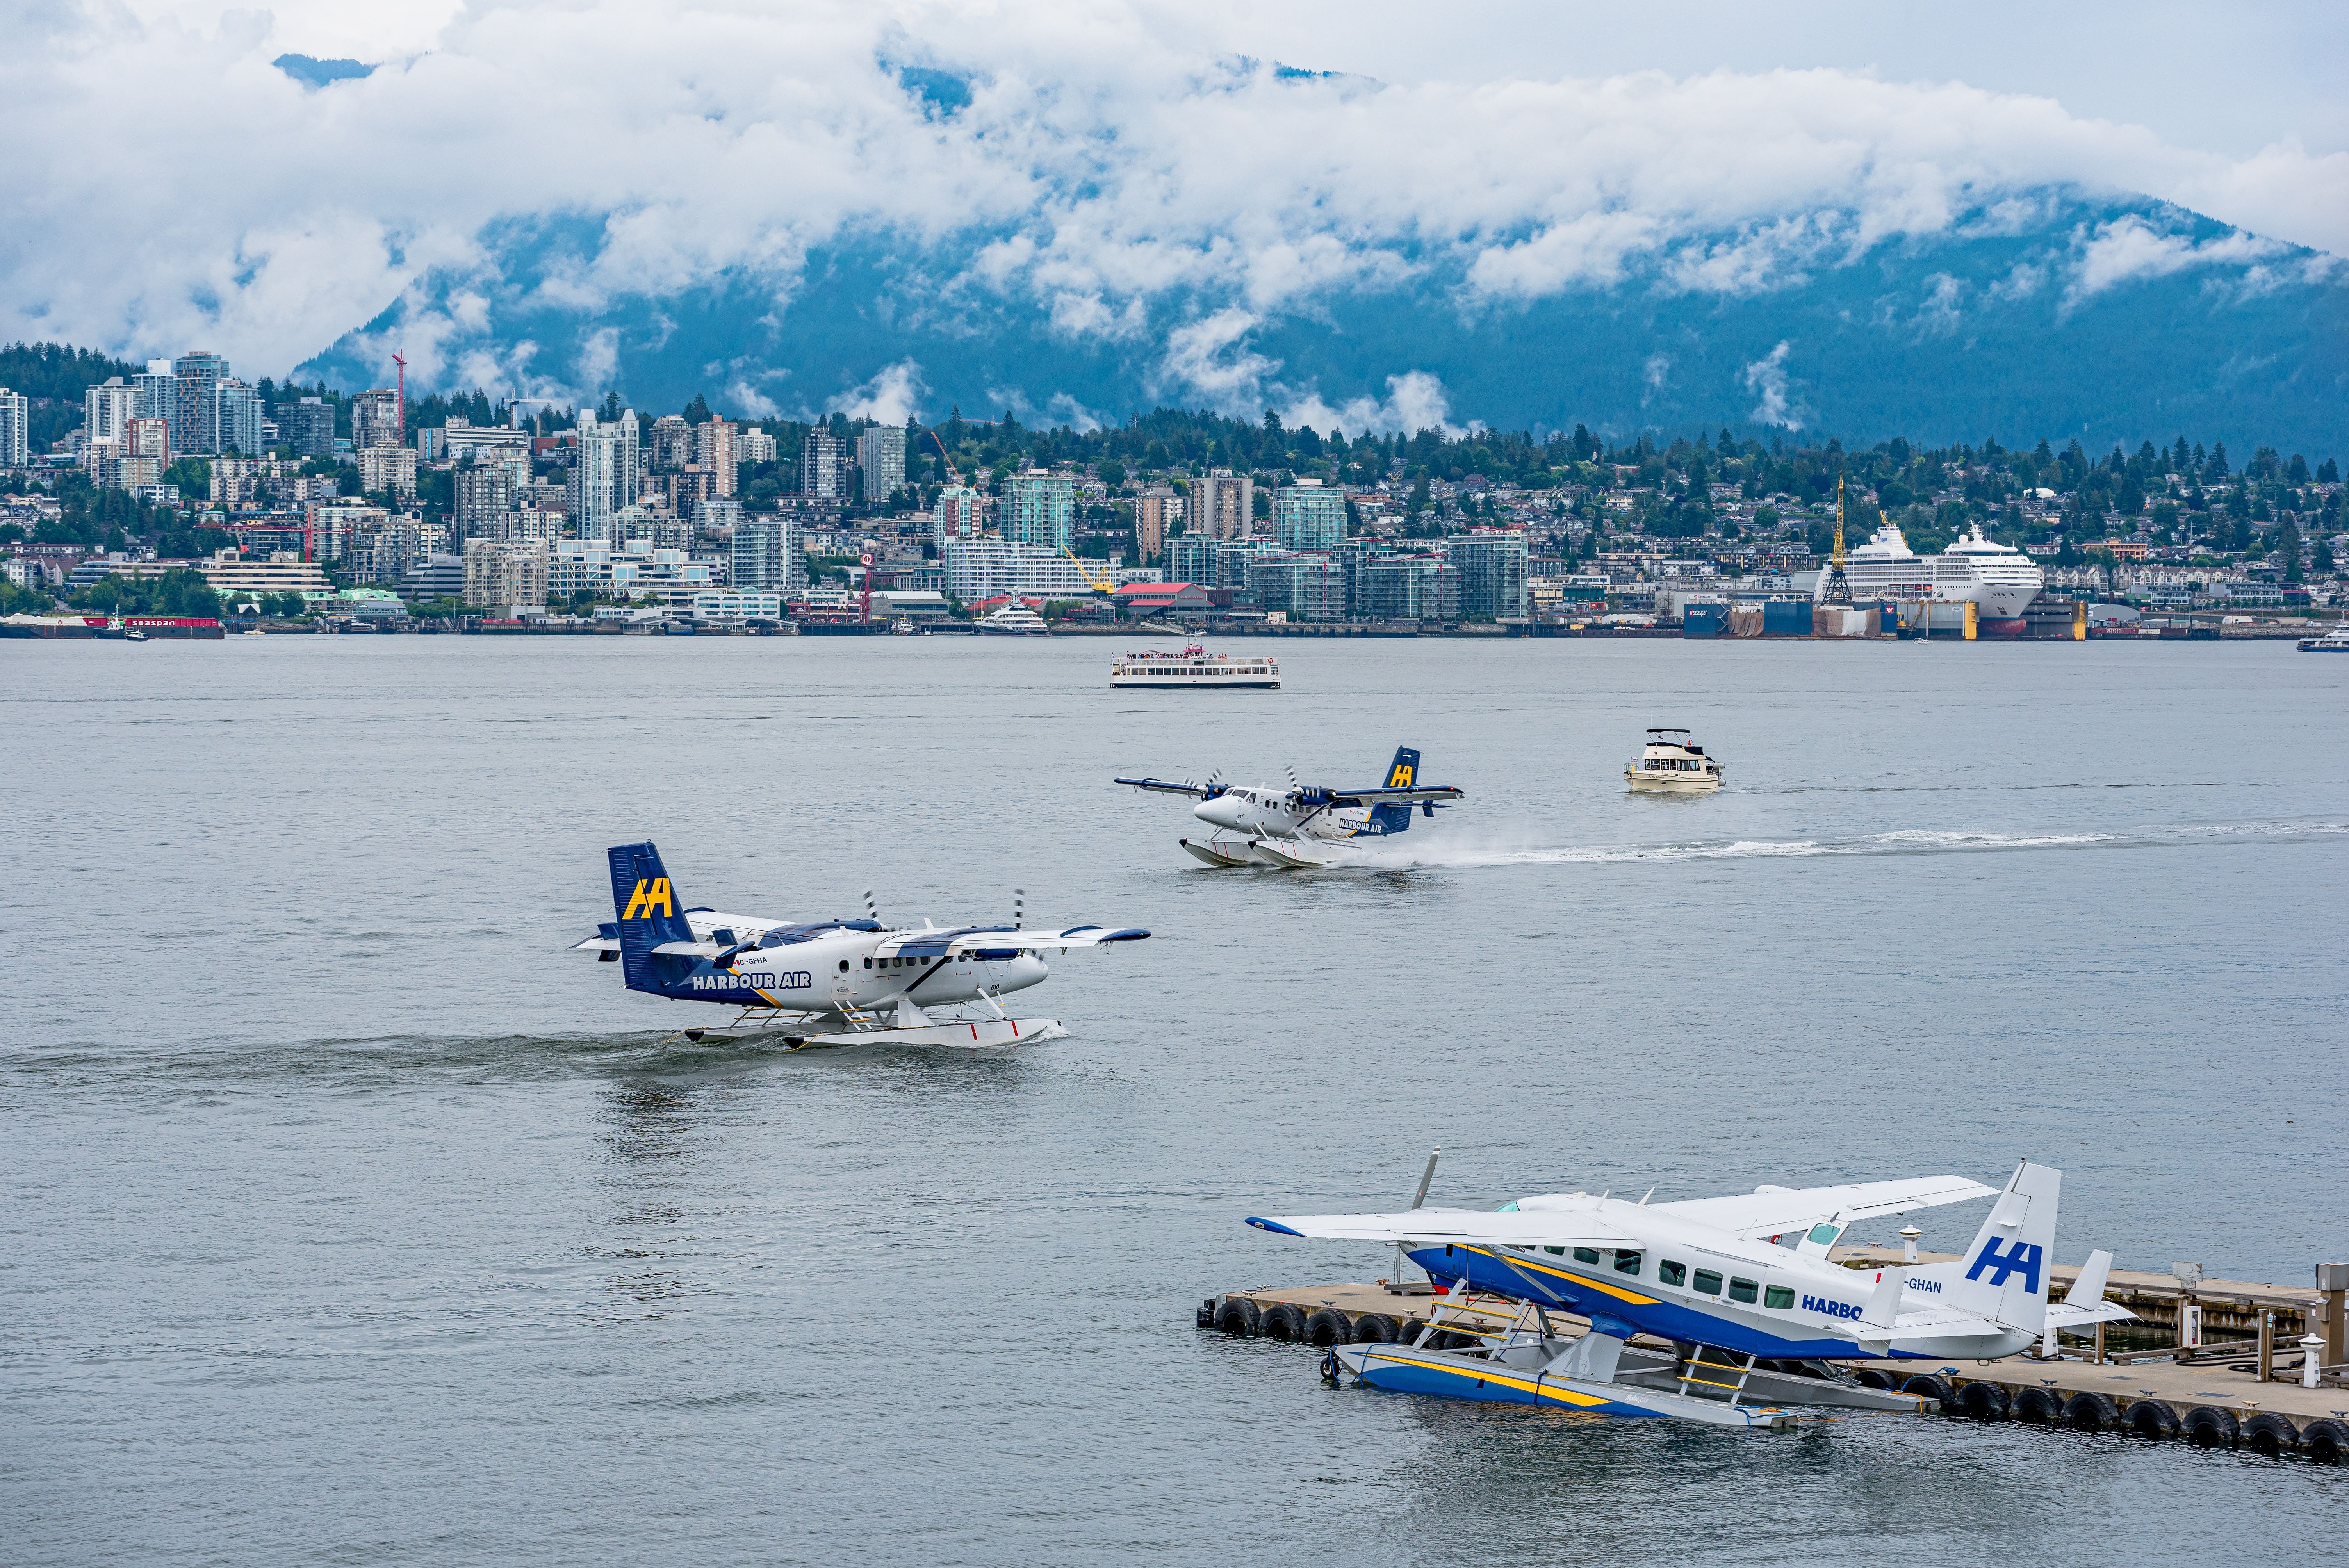 Several aircraft of Harbour Air 